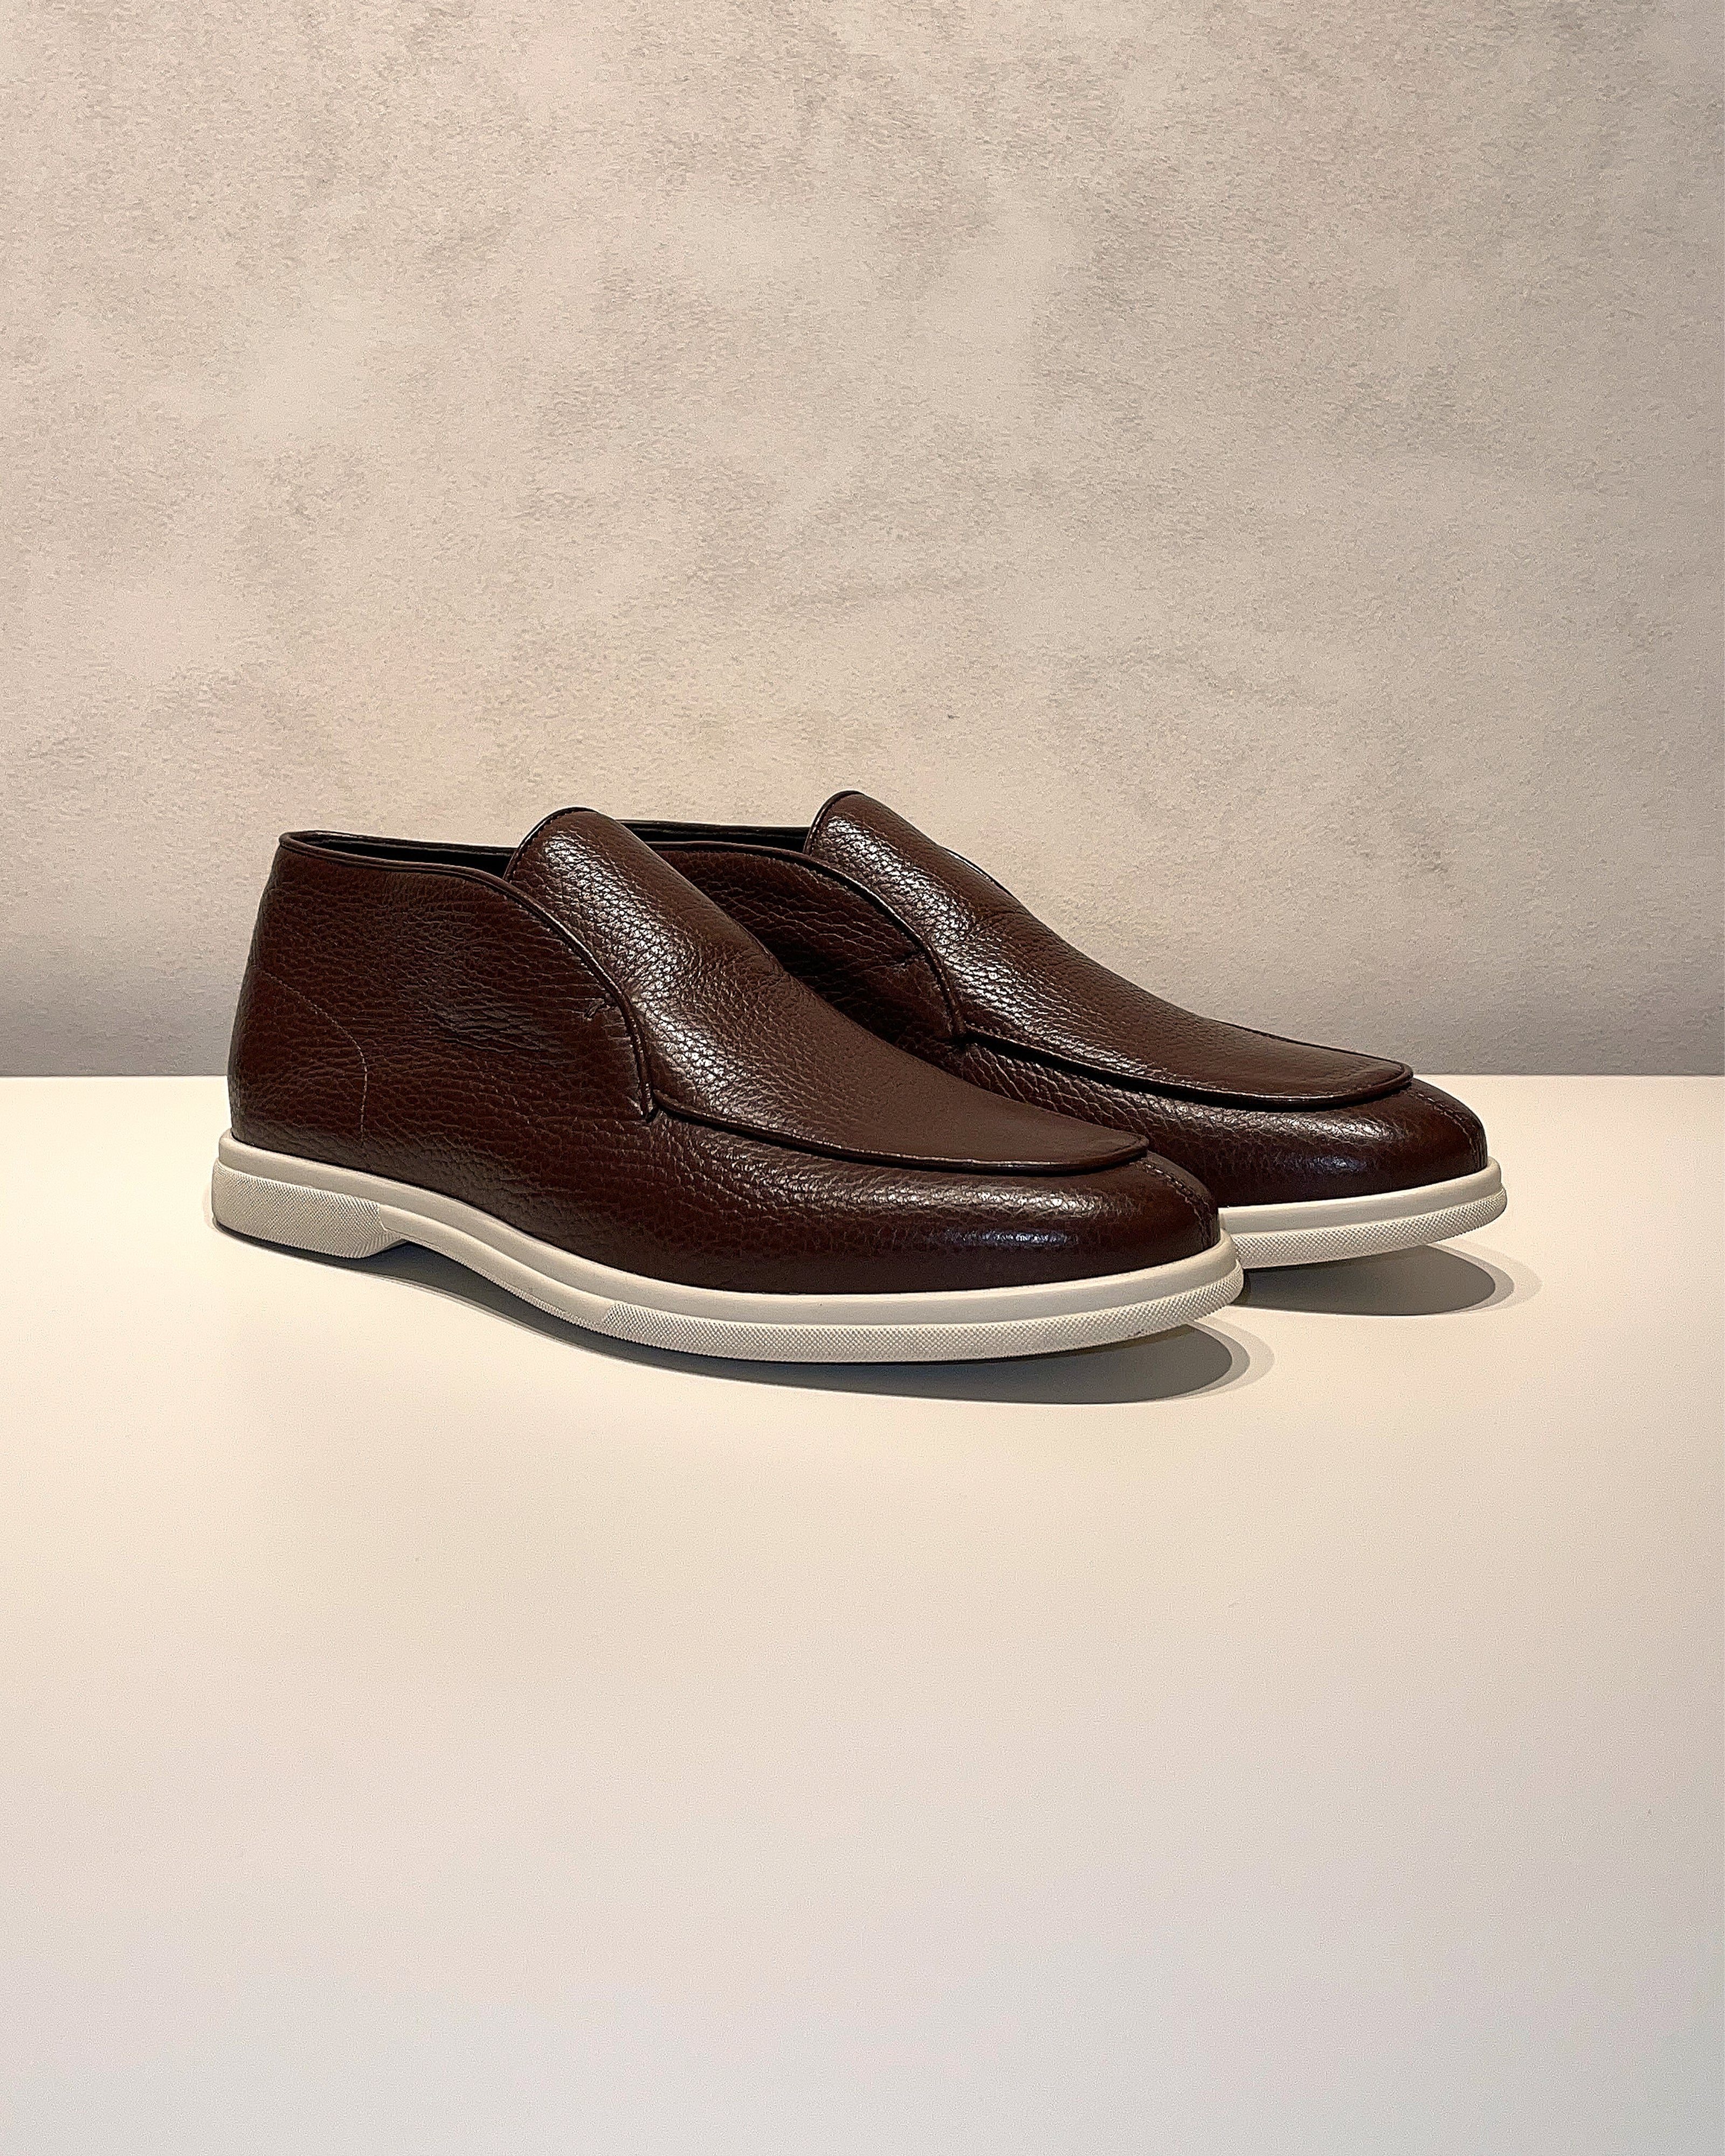 Exquisite Leather Loafers Chestnut Brown Grained Elegance